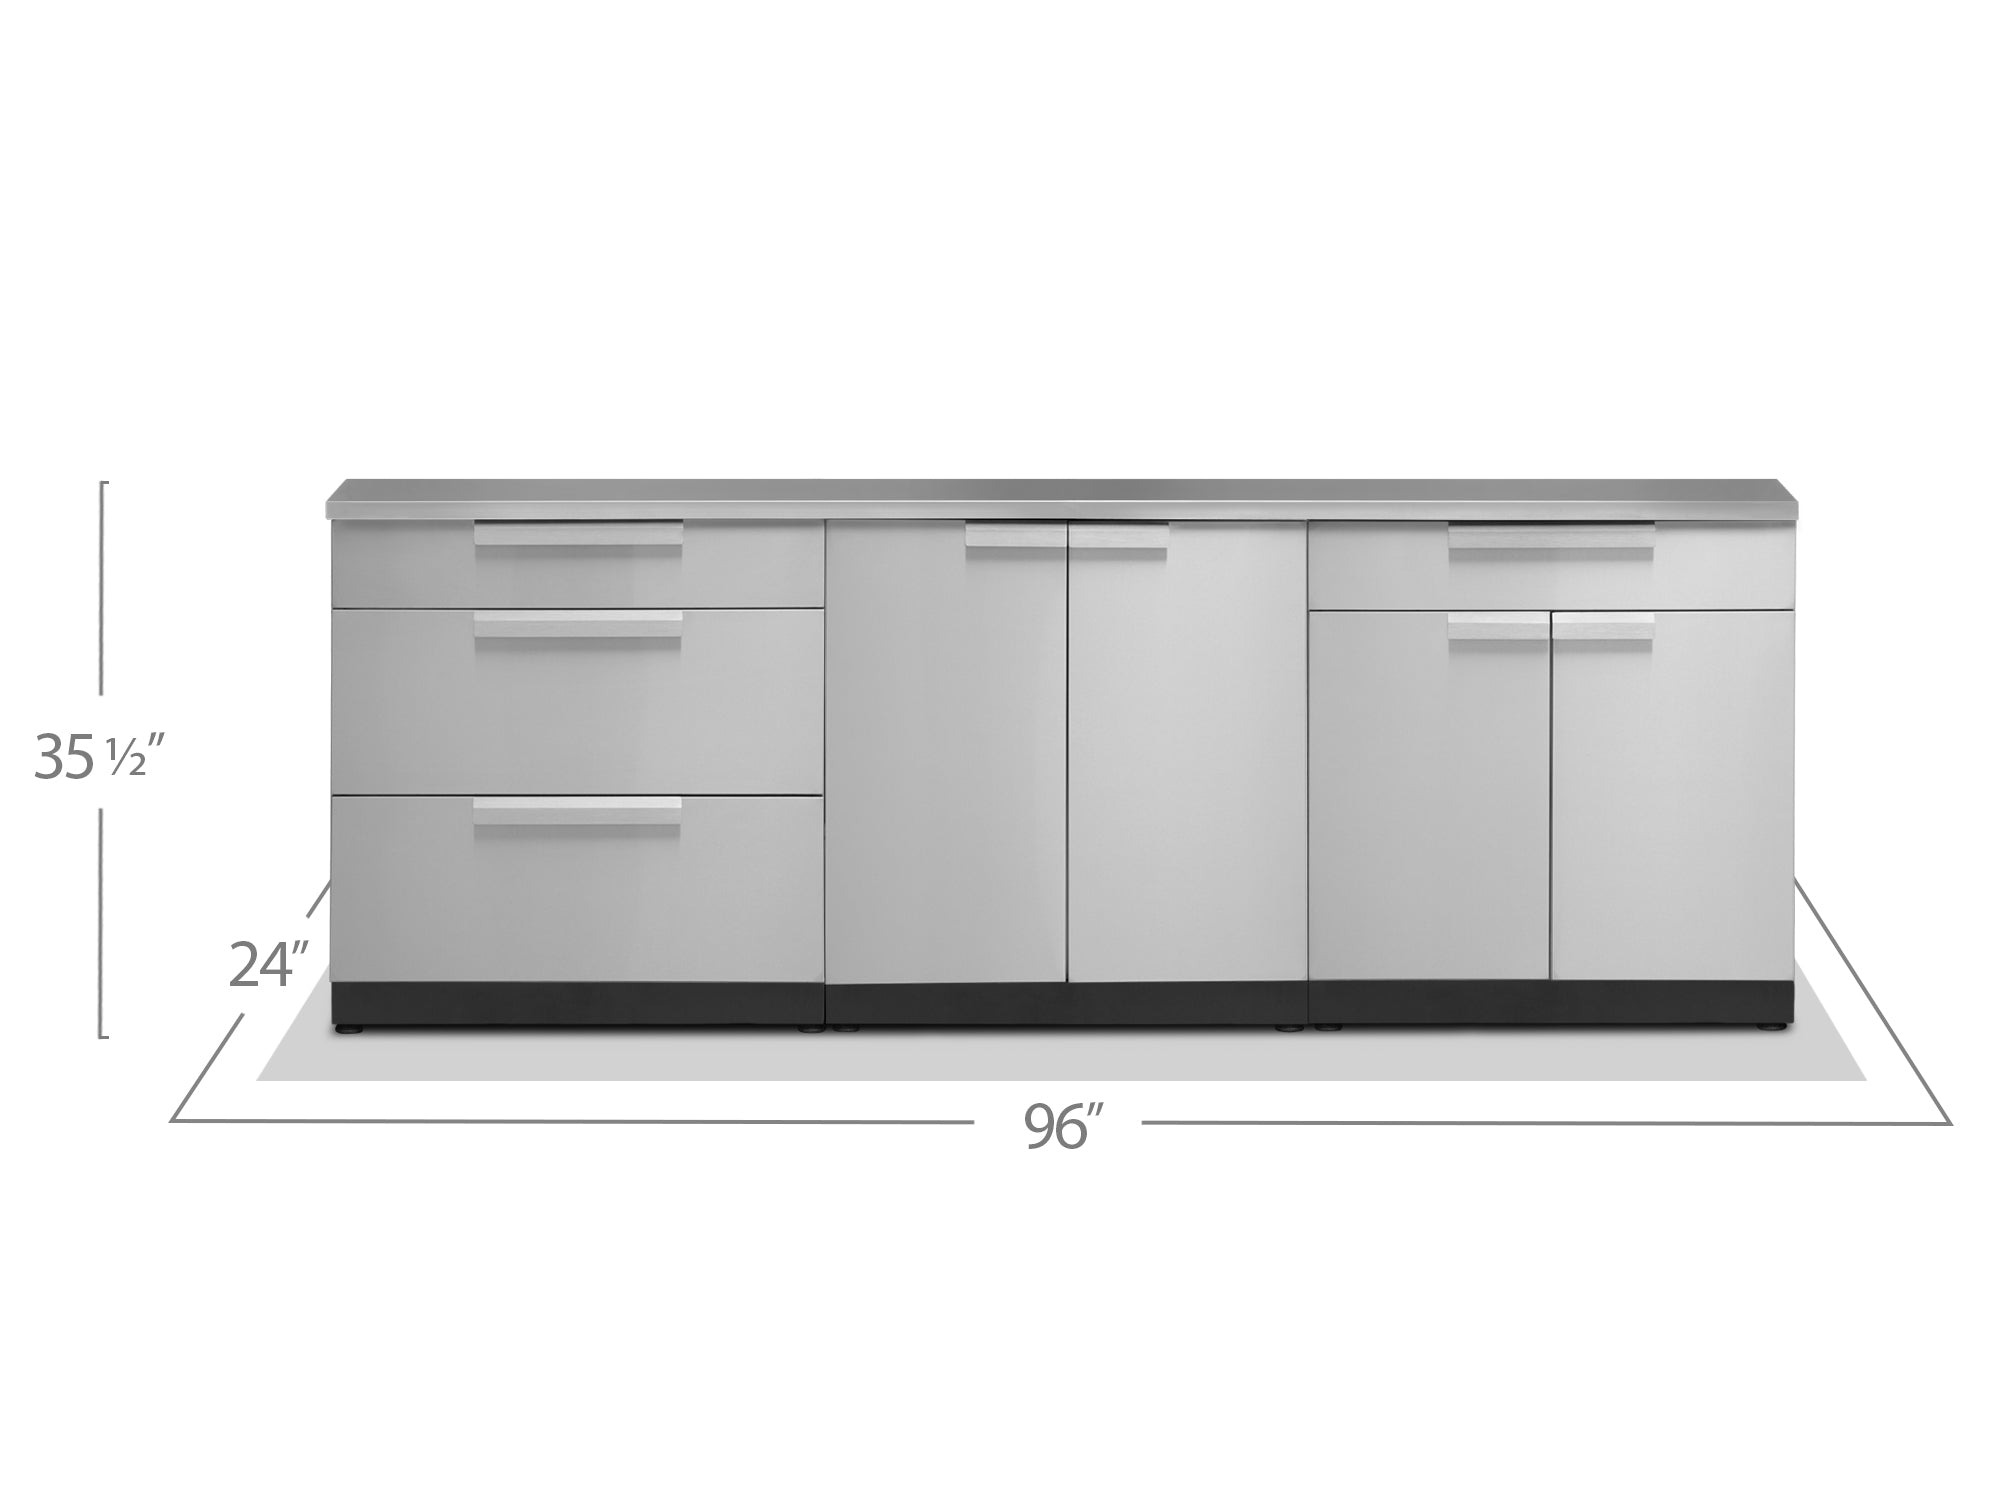 Newage Outdoor Kitchen 3 PC Cabinet Set in Stainless Steel - 65084